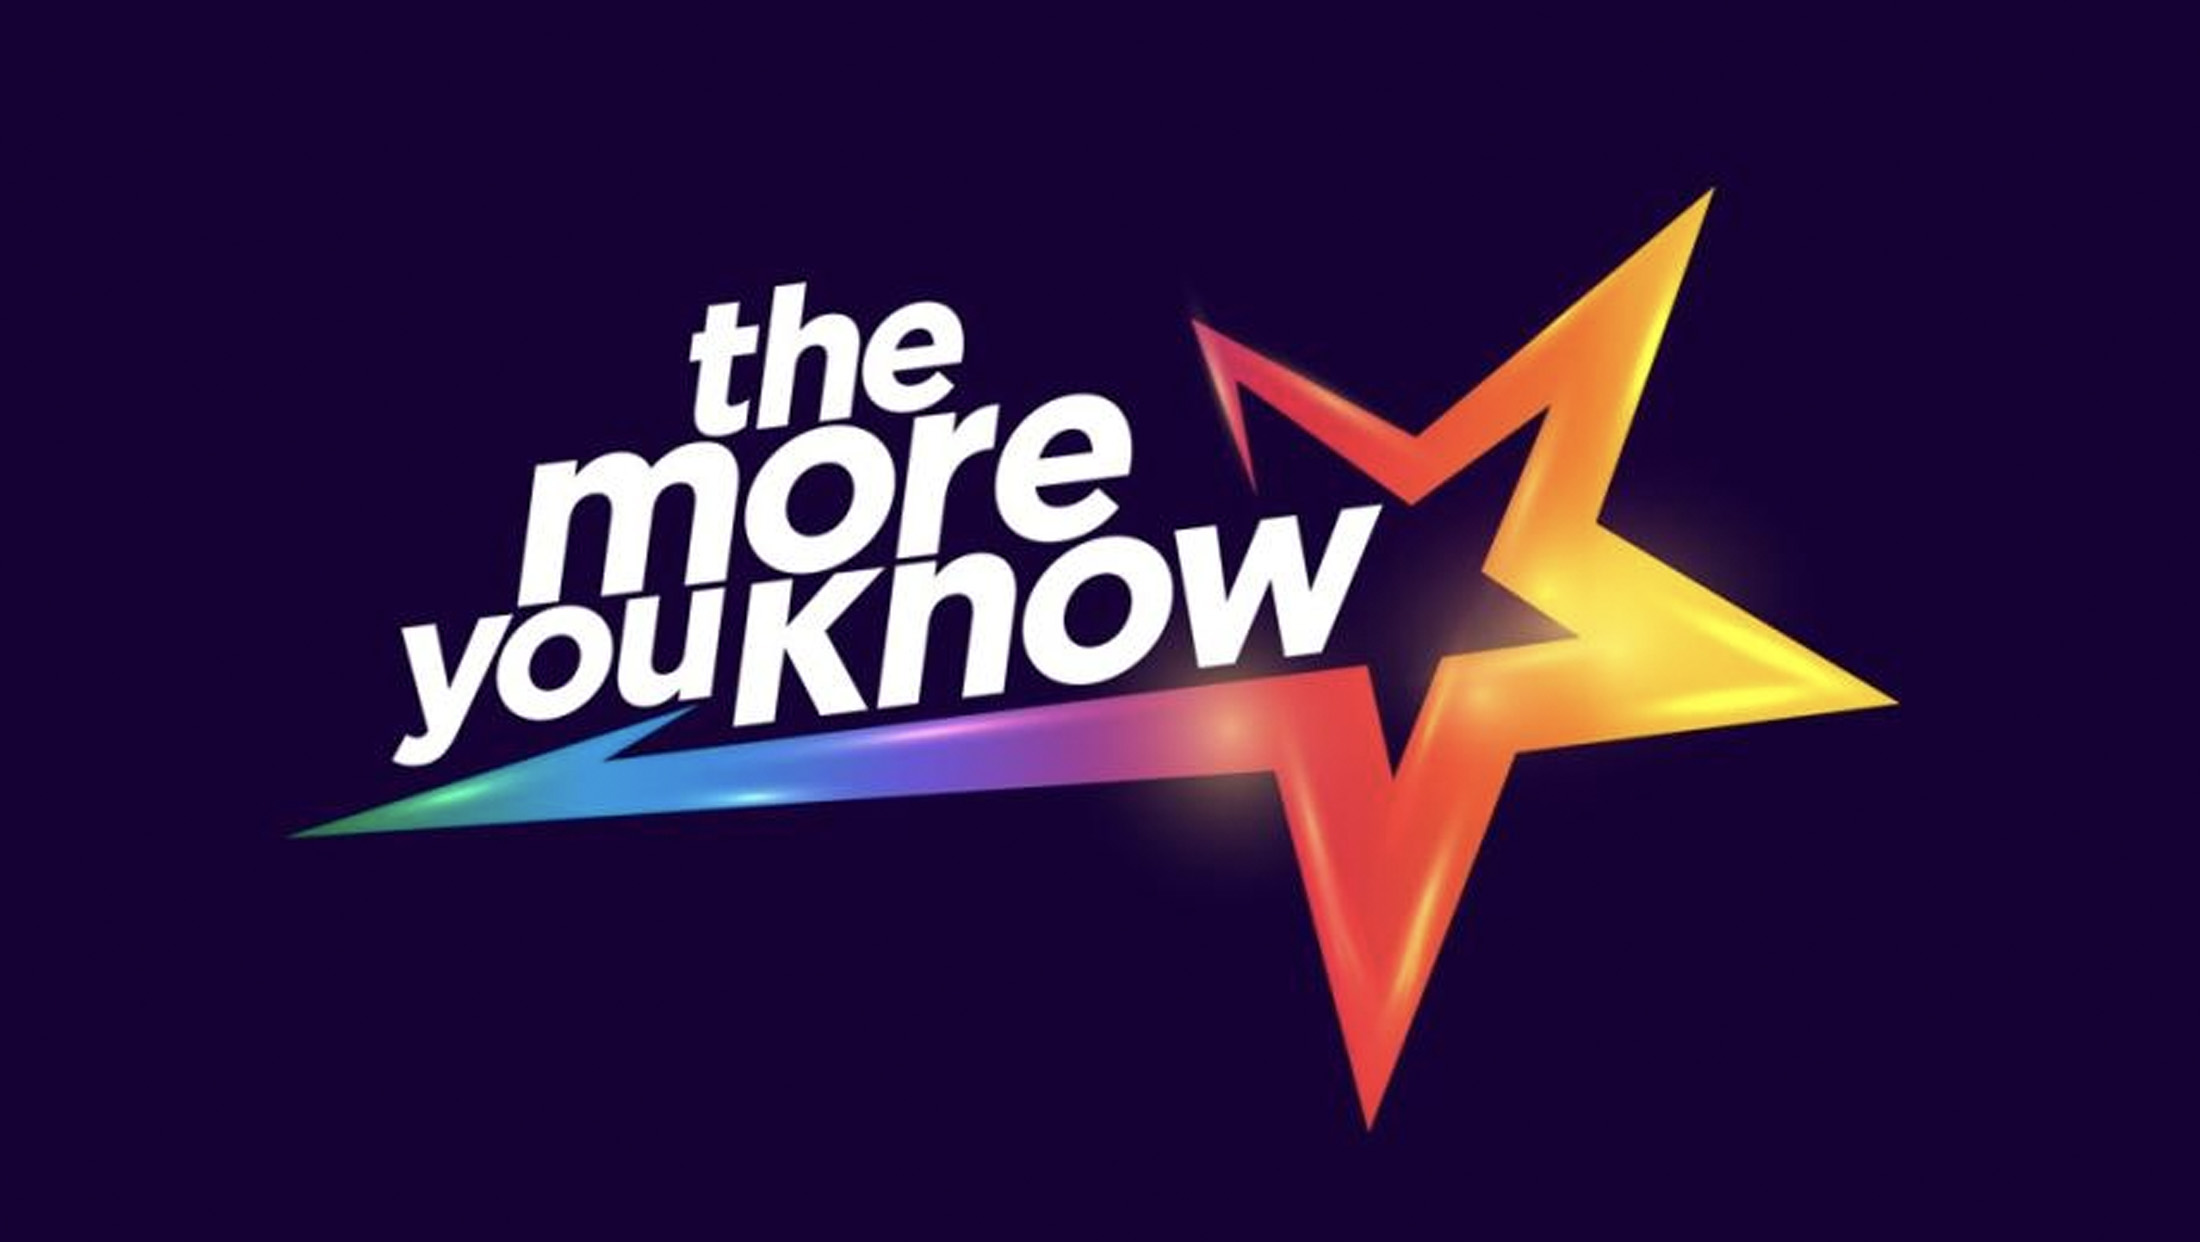 CNBC launches ‘The More You Know’ campaign on financial literacy [Video]